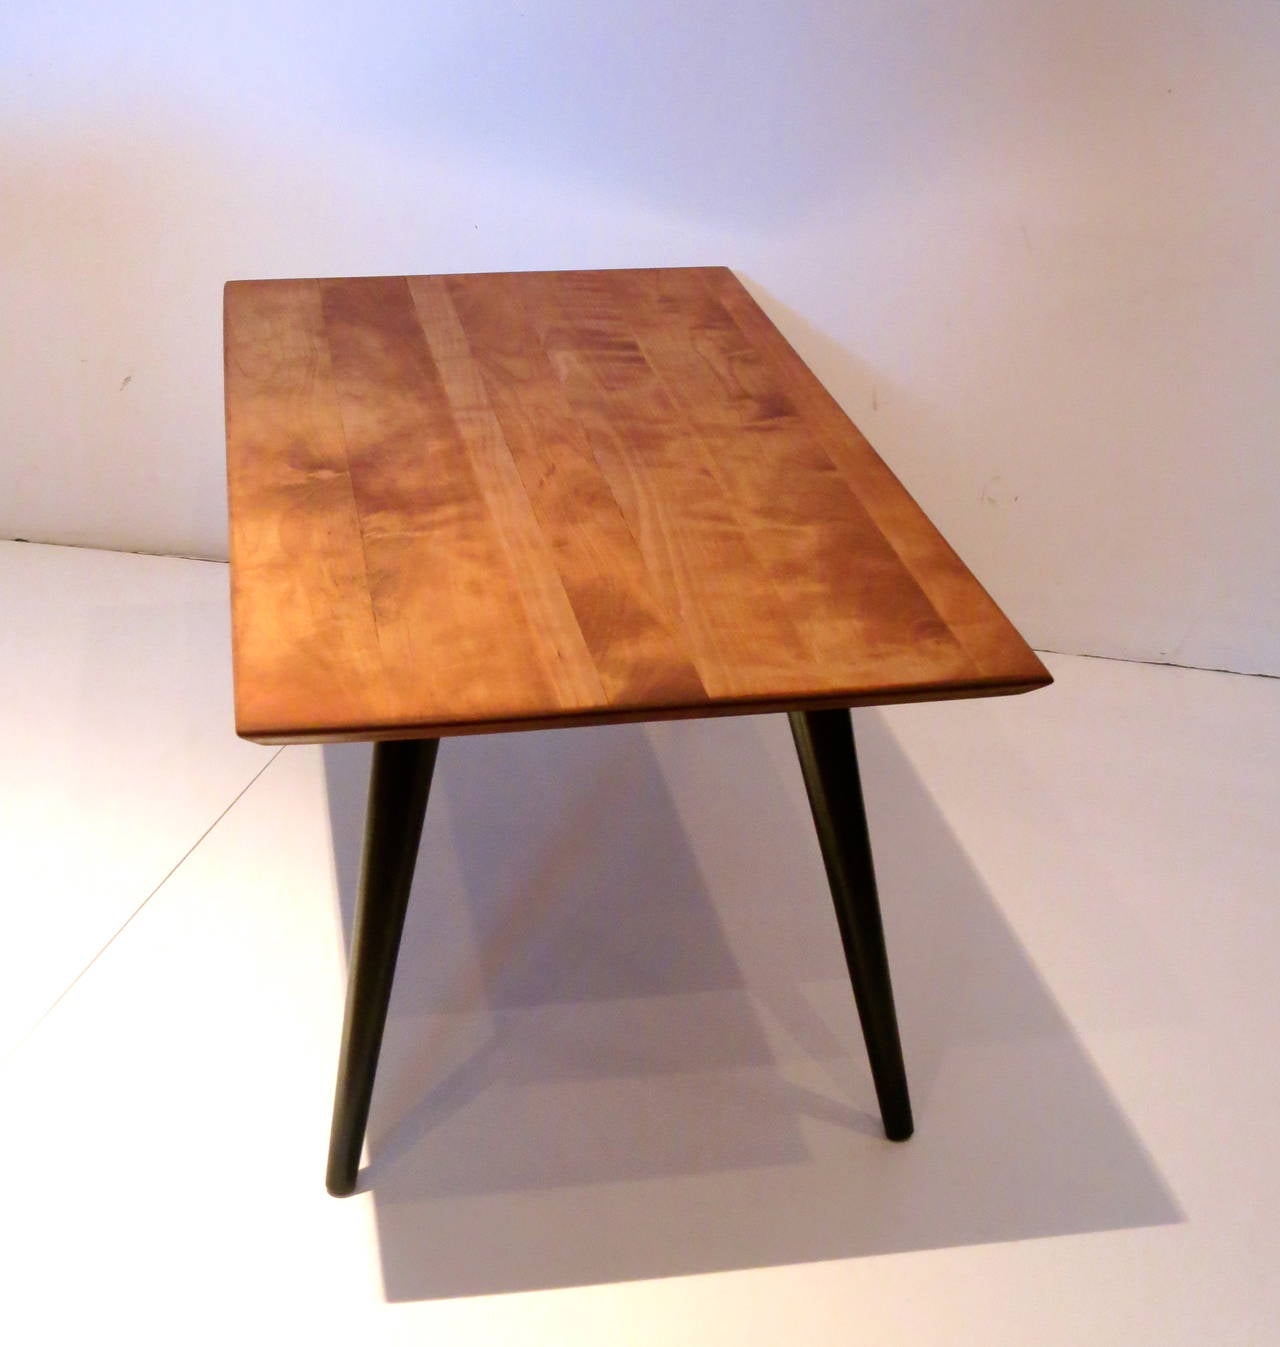 Mid-Century Modern American Modern small coffee table by Paul McCobb for Winchendon early prod.